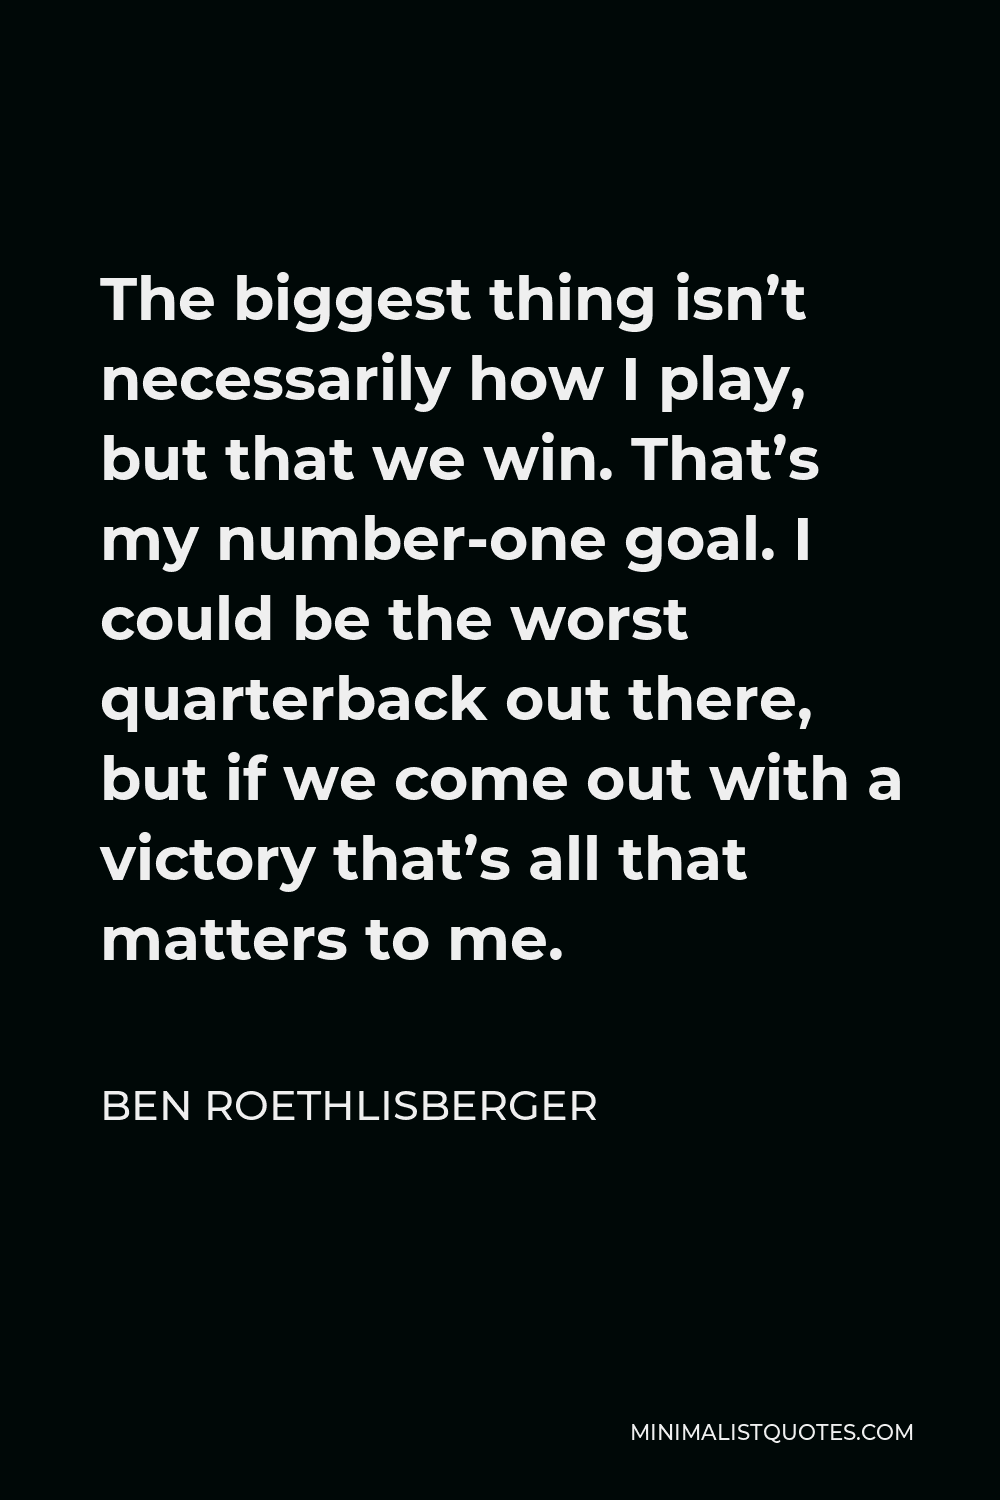 Ben Roethlisberger Quote - The biggest thing isn’t necessarily how I play, but that we win. That’s my number-one goal. I could be the worst quarterback out there, but if we come out with a victory that’s all that matters to me.